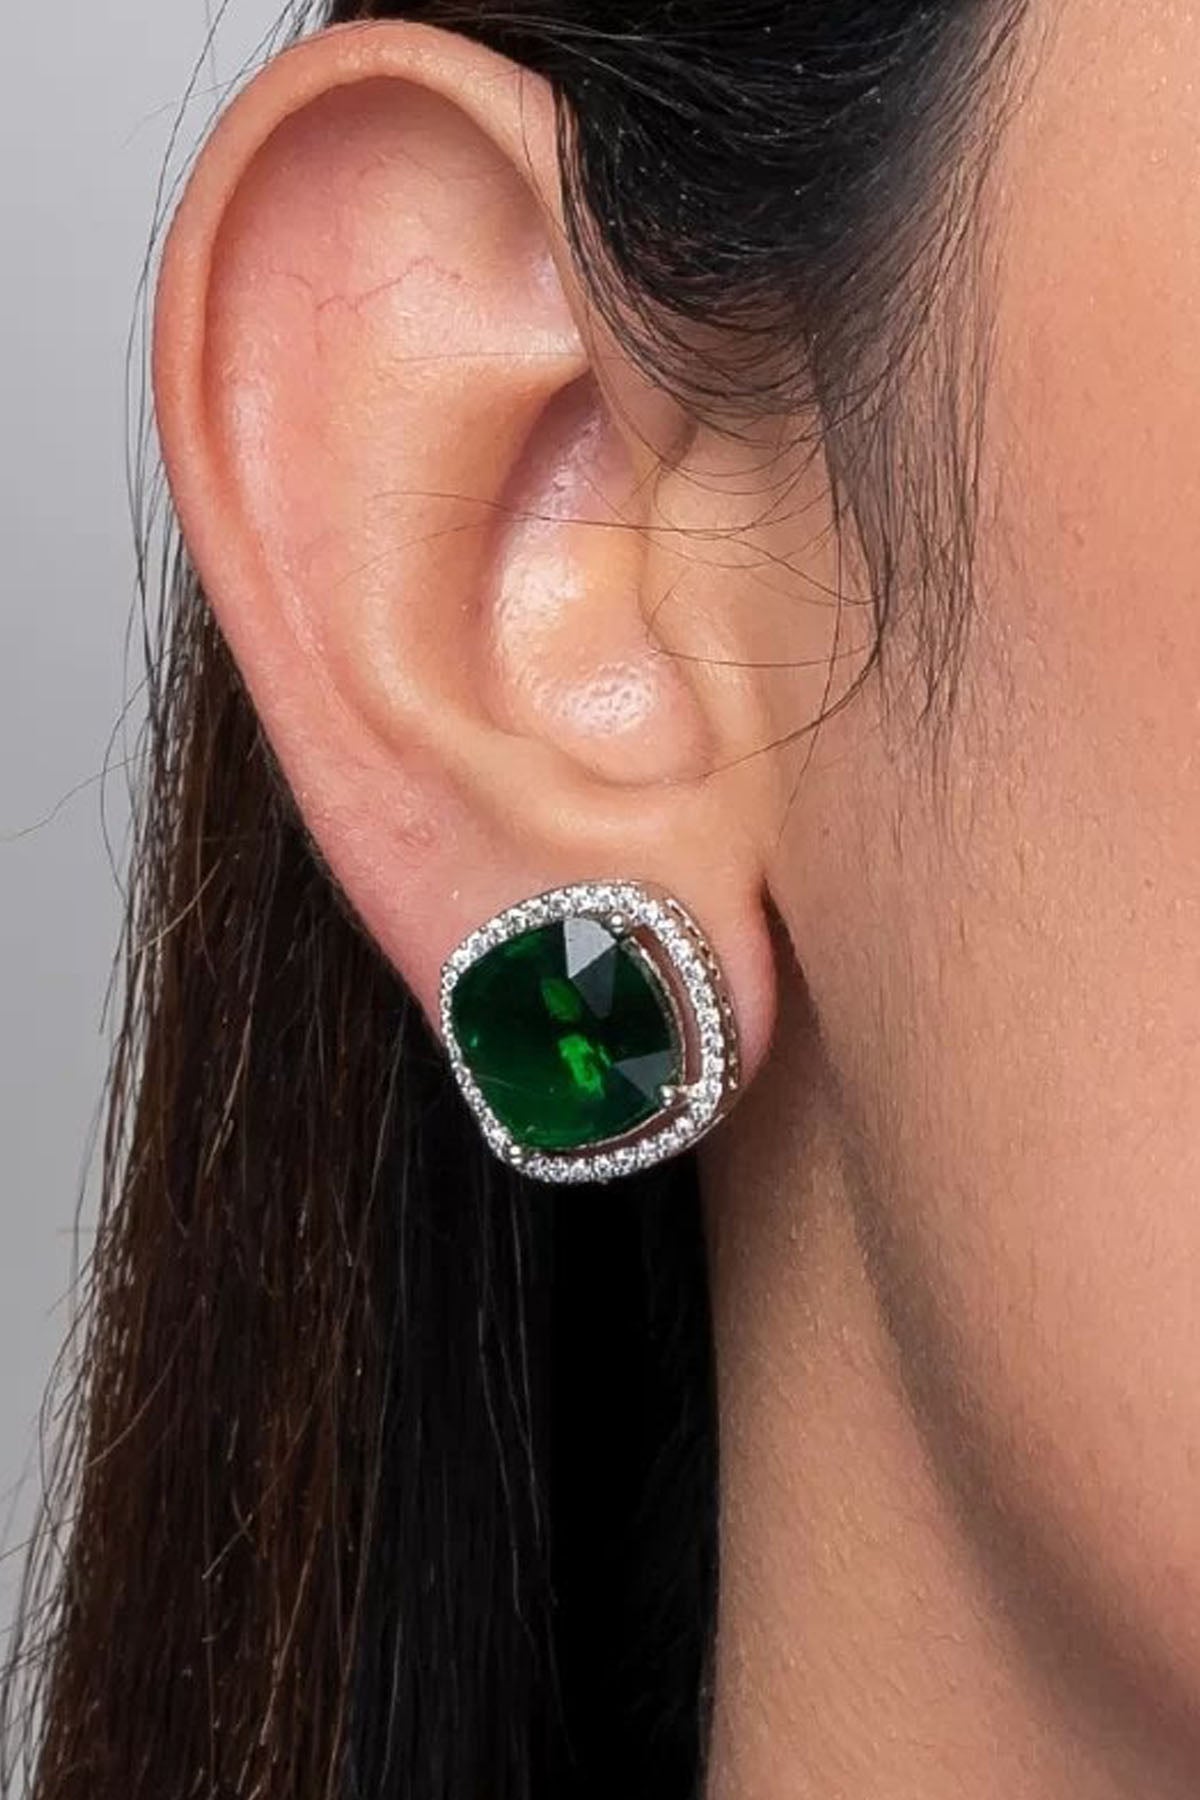 Green Square American Diamond of Brand Putstyle Available online at ScrollnShops